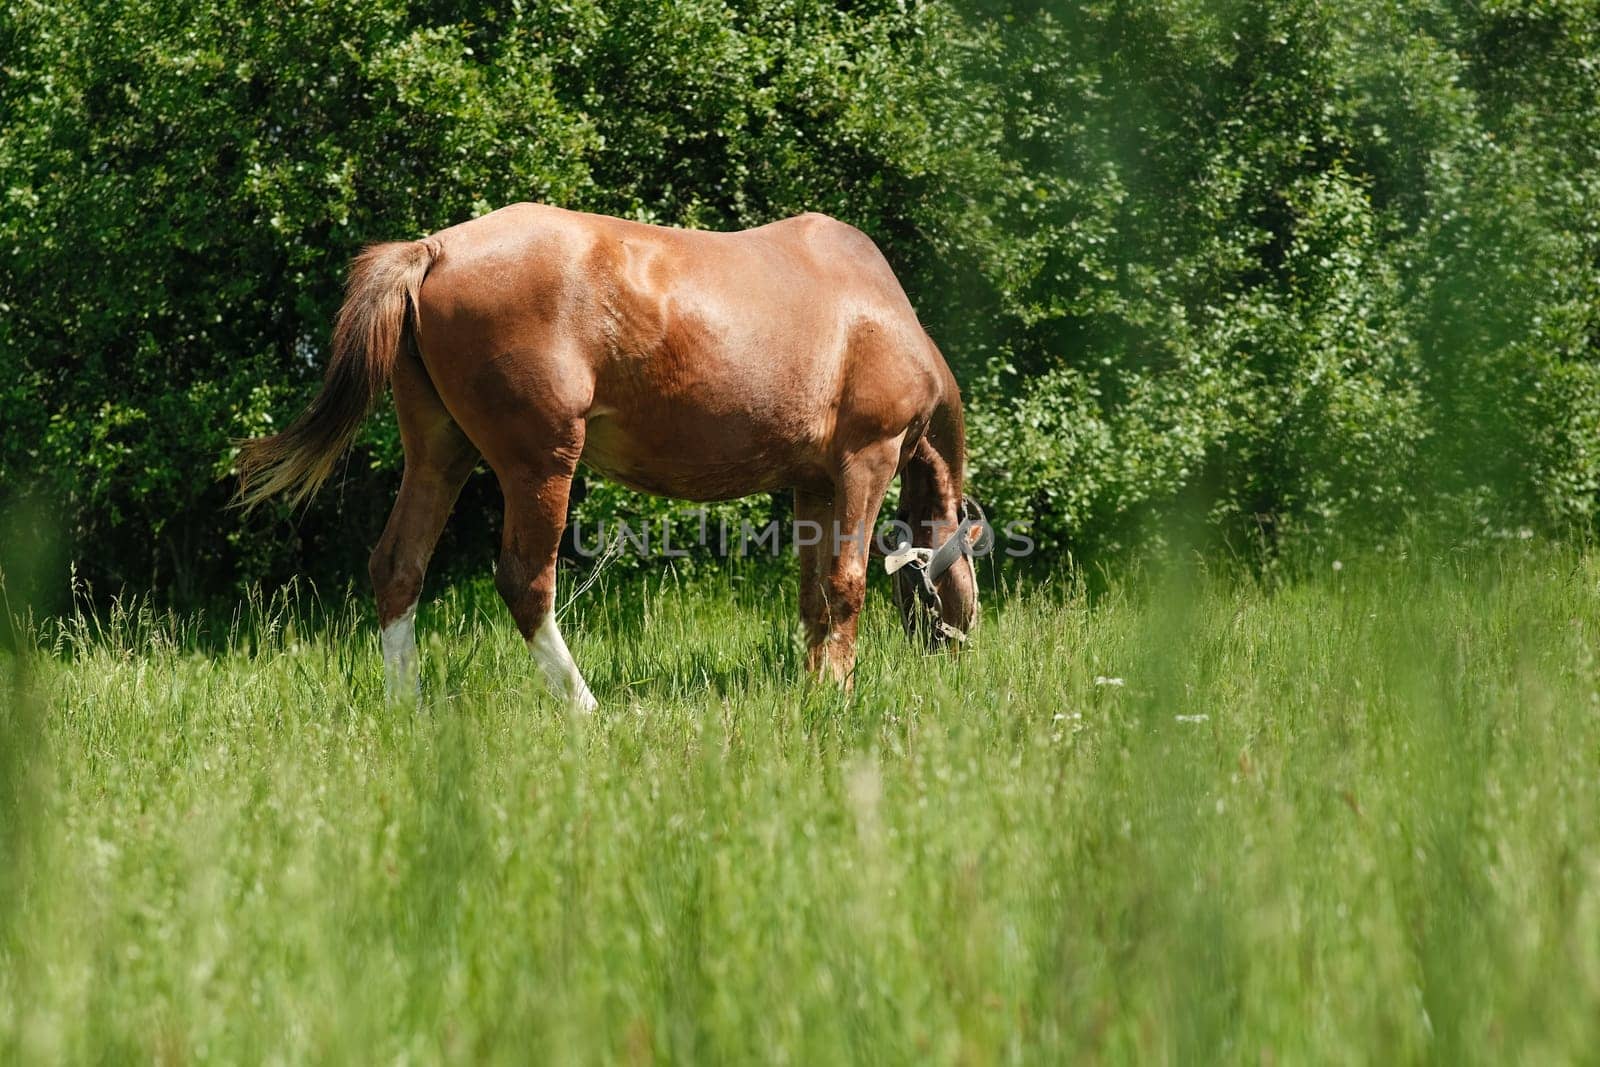 A red horse grazes on a green lawn, against the background of bushes and trees. The horse is tied to a chain. Skinny horse.